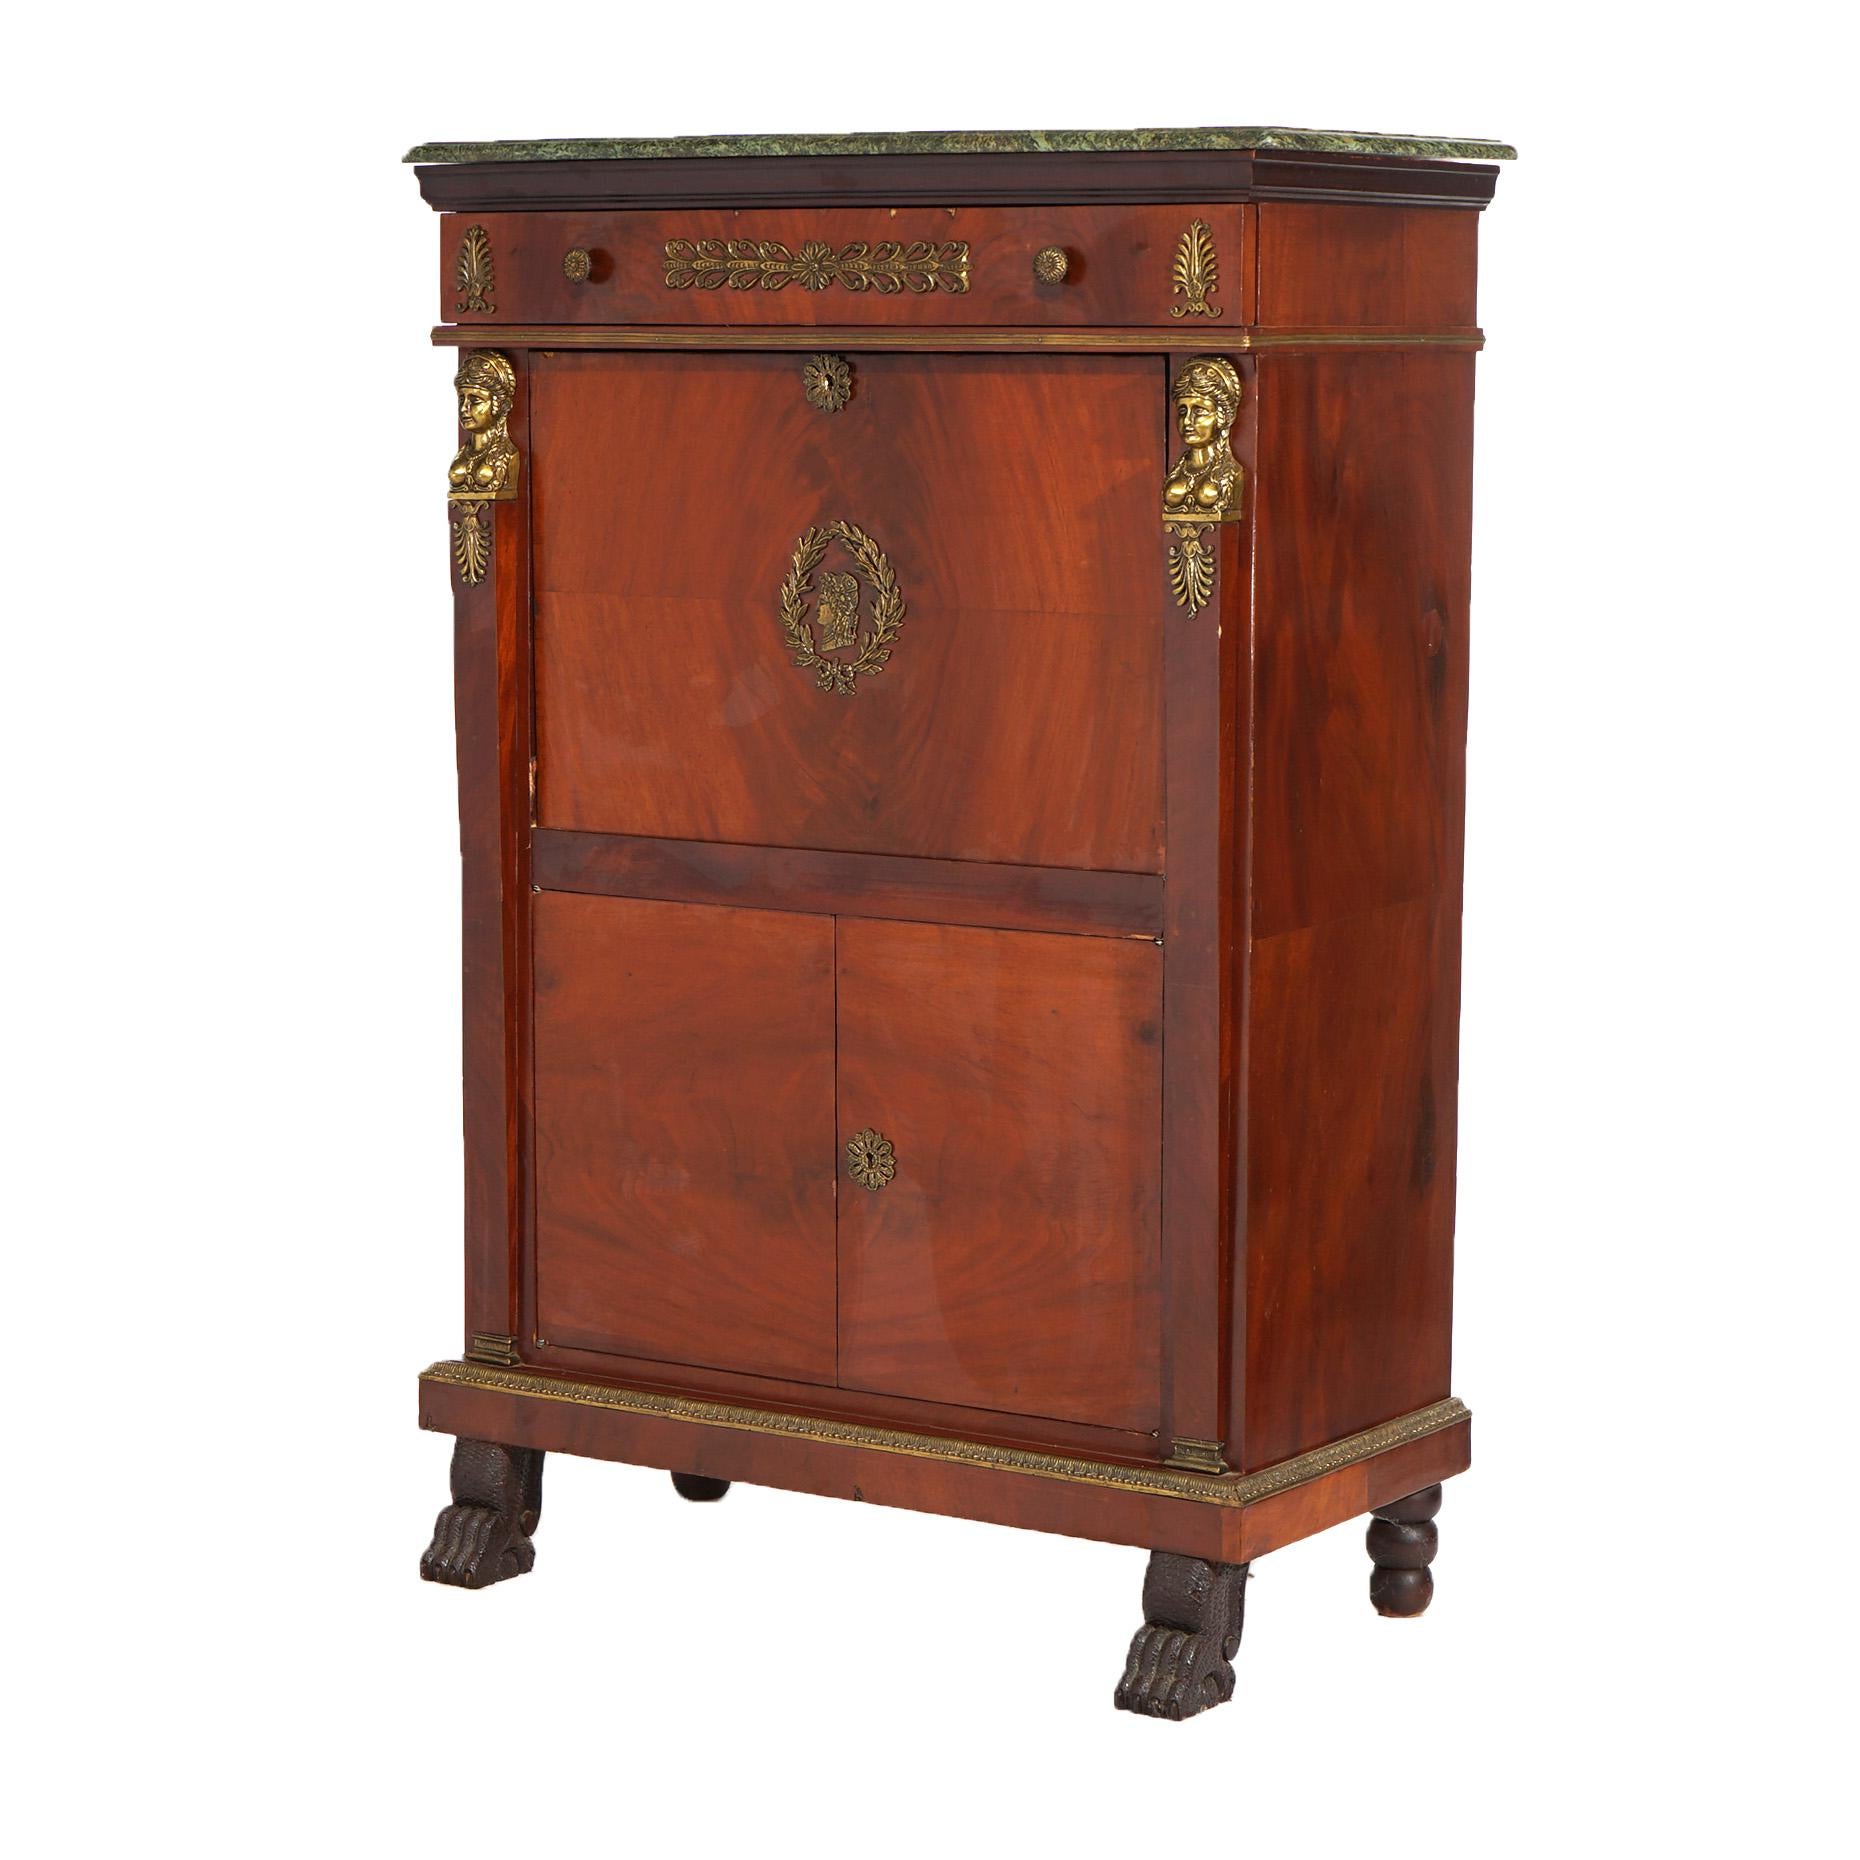 An antique French Empire abattant secretary offers flame mahogany construction with upper drawer over drop front desk opening to interior with pigeon holes and drawers, surmounting lower double blind door cabinet; cast ormolu mounts throughout